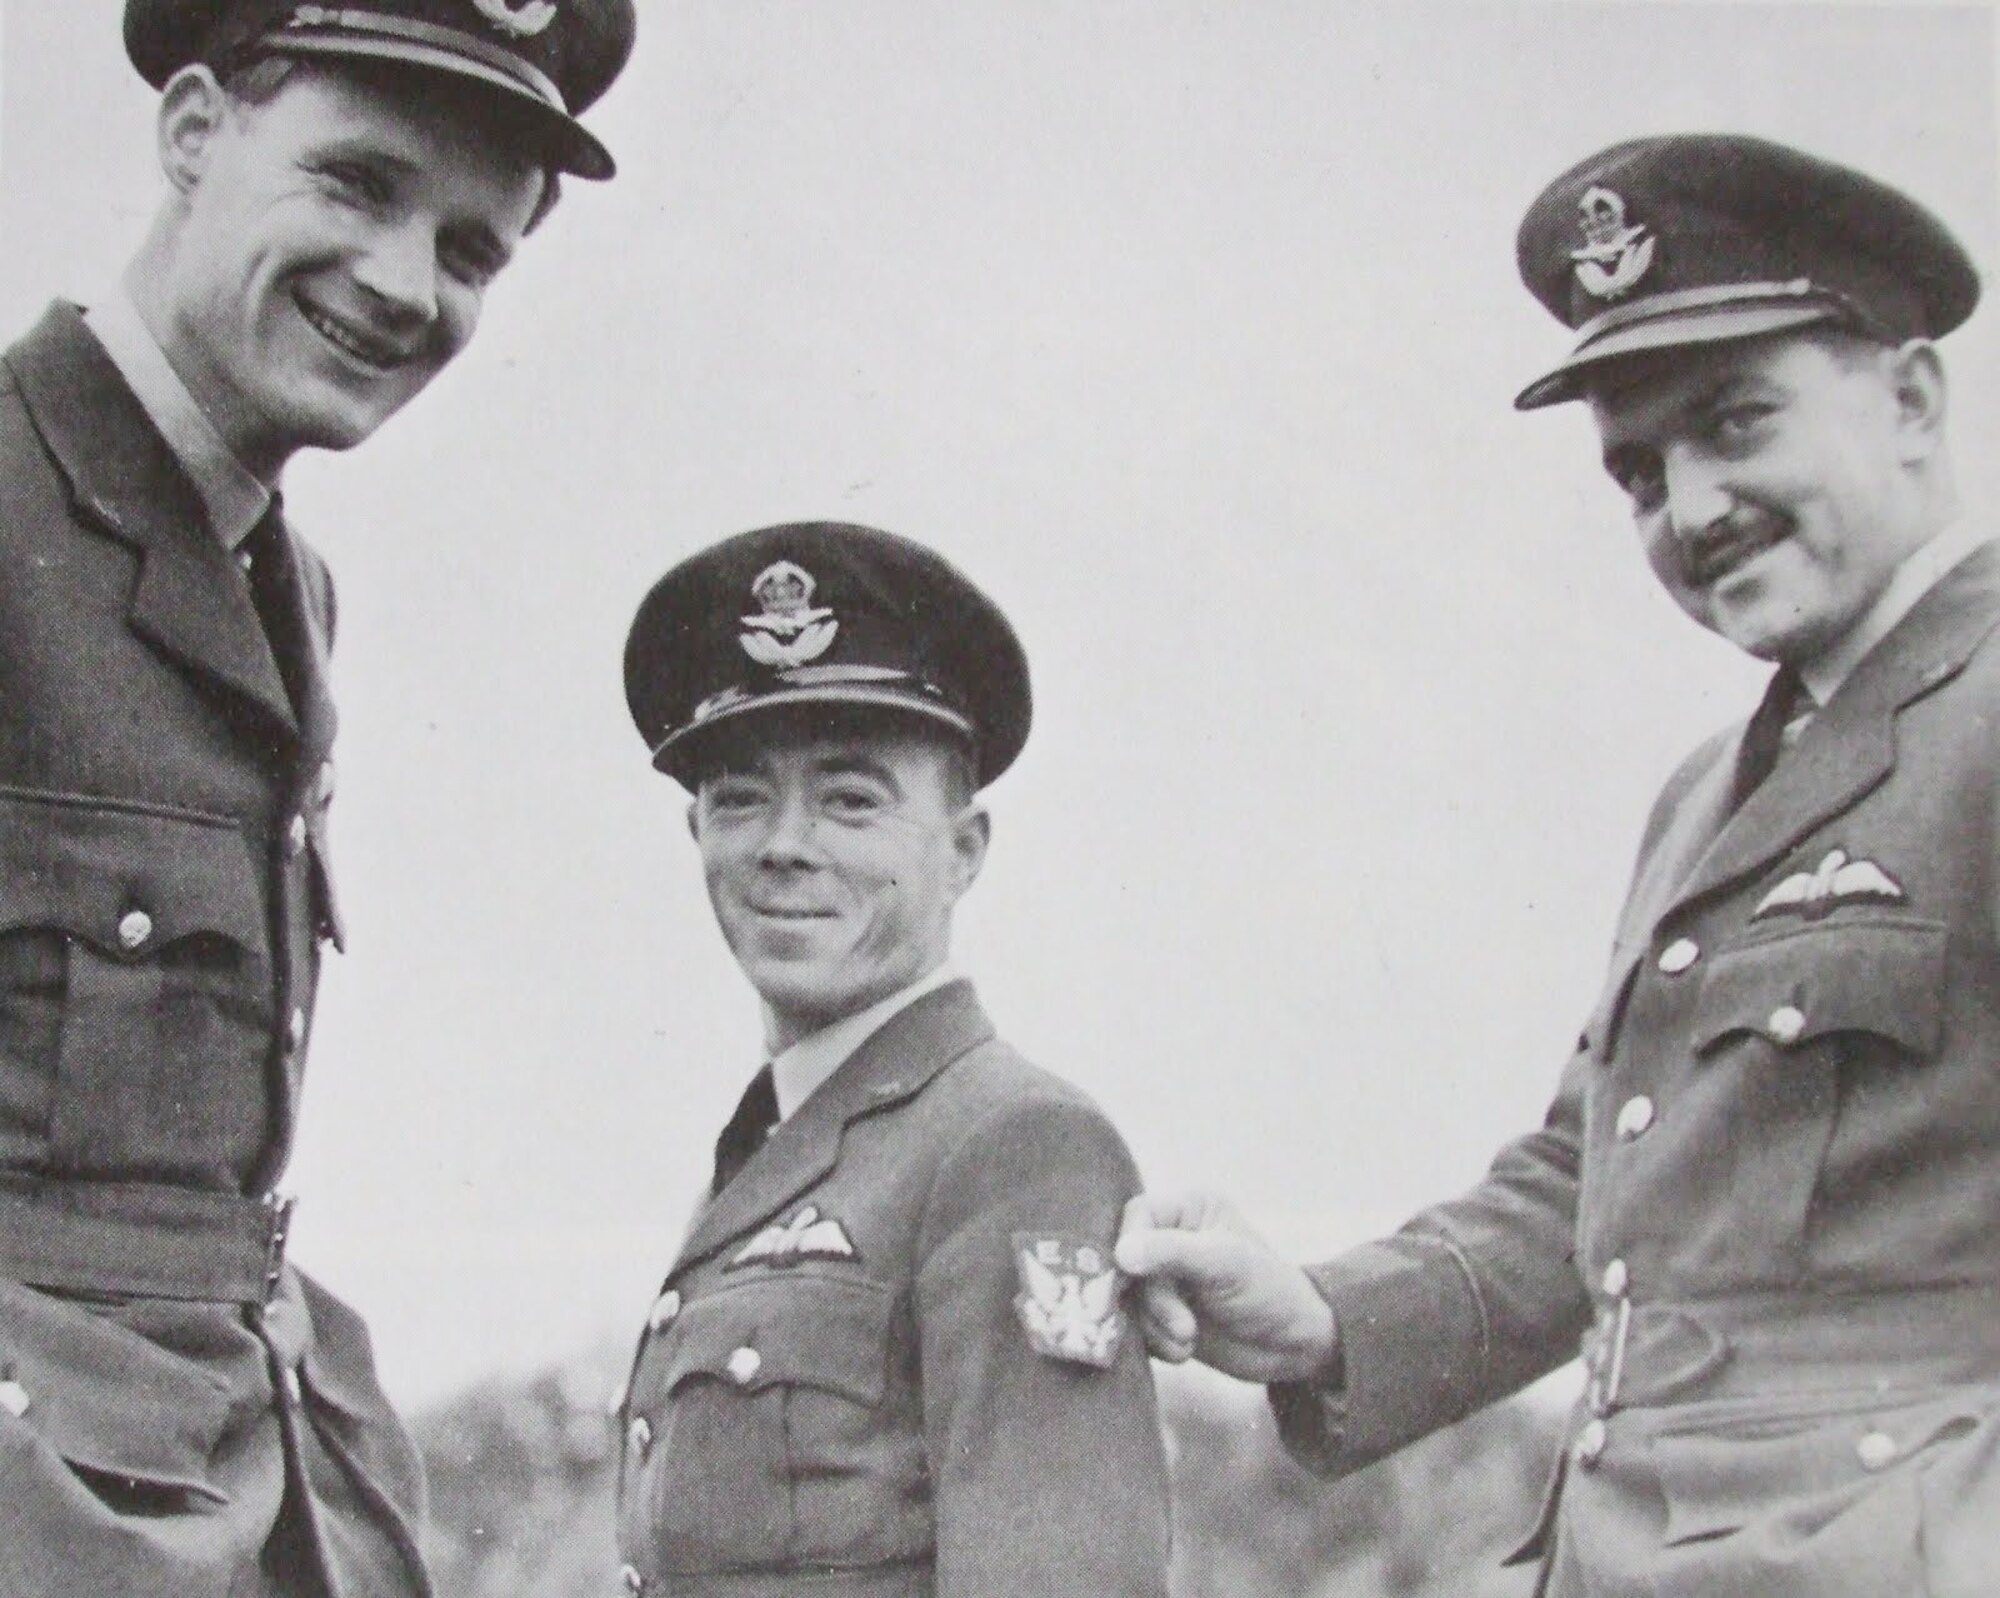 Eugene “Red” Tobin (left), Vernon “Shorty” Keough and Andy Mamedoff, volunteers with the Royal Air Force Eagle Squadrons, fought in the Battle of Britain during World War II. Considered the founding fathers of the 4th Fighter Wing, their efforts led to the establishment of the 334th, 335th, and 336th Fighter Squadrons which still operate today. (Courtesy Photo)